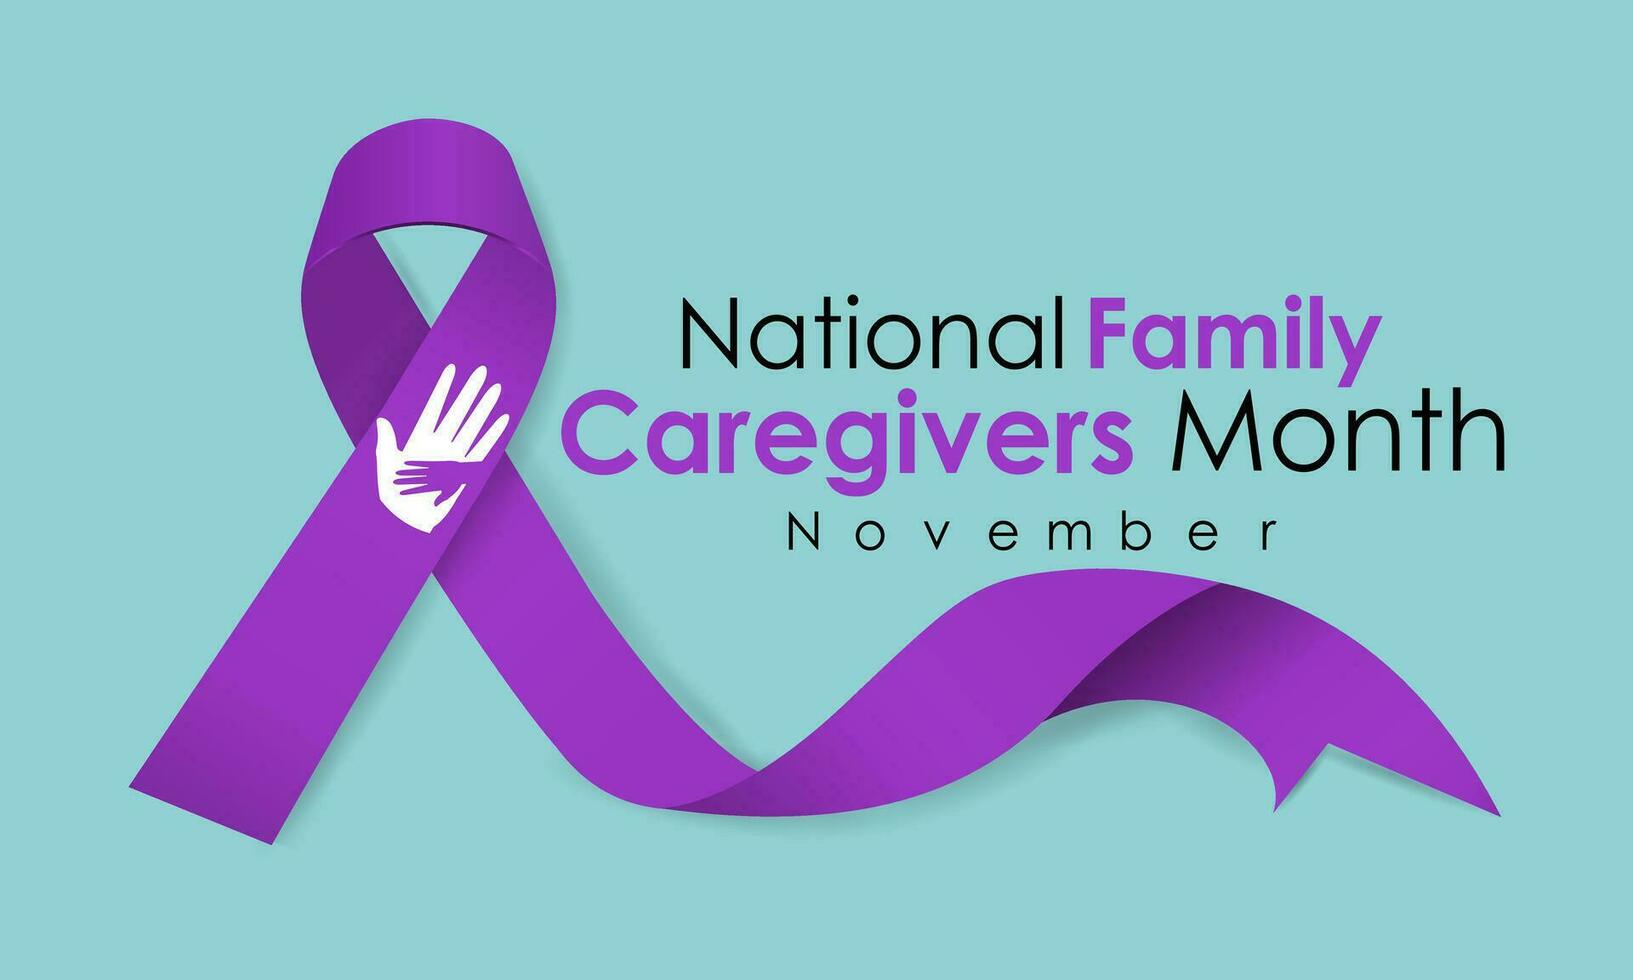 Family Caregivers month  is observed every year in November. Calligraphy Poster Design. A Plum Ribbon brings awareness to Cancer Caregivers. vector